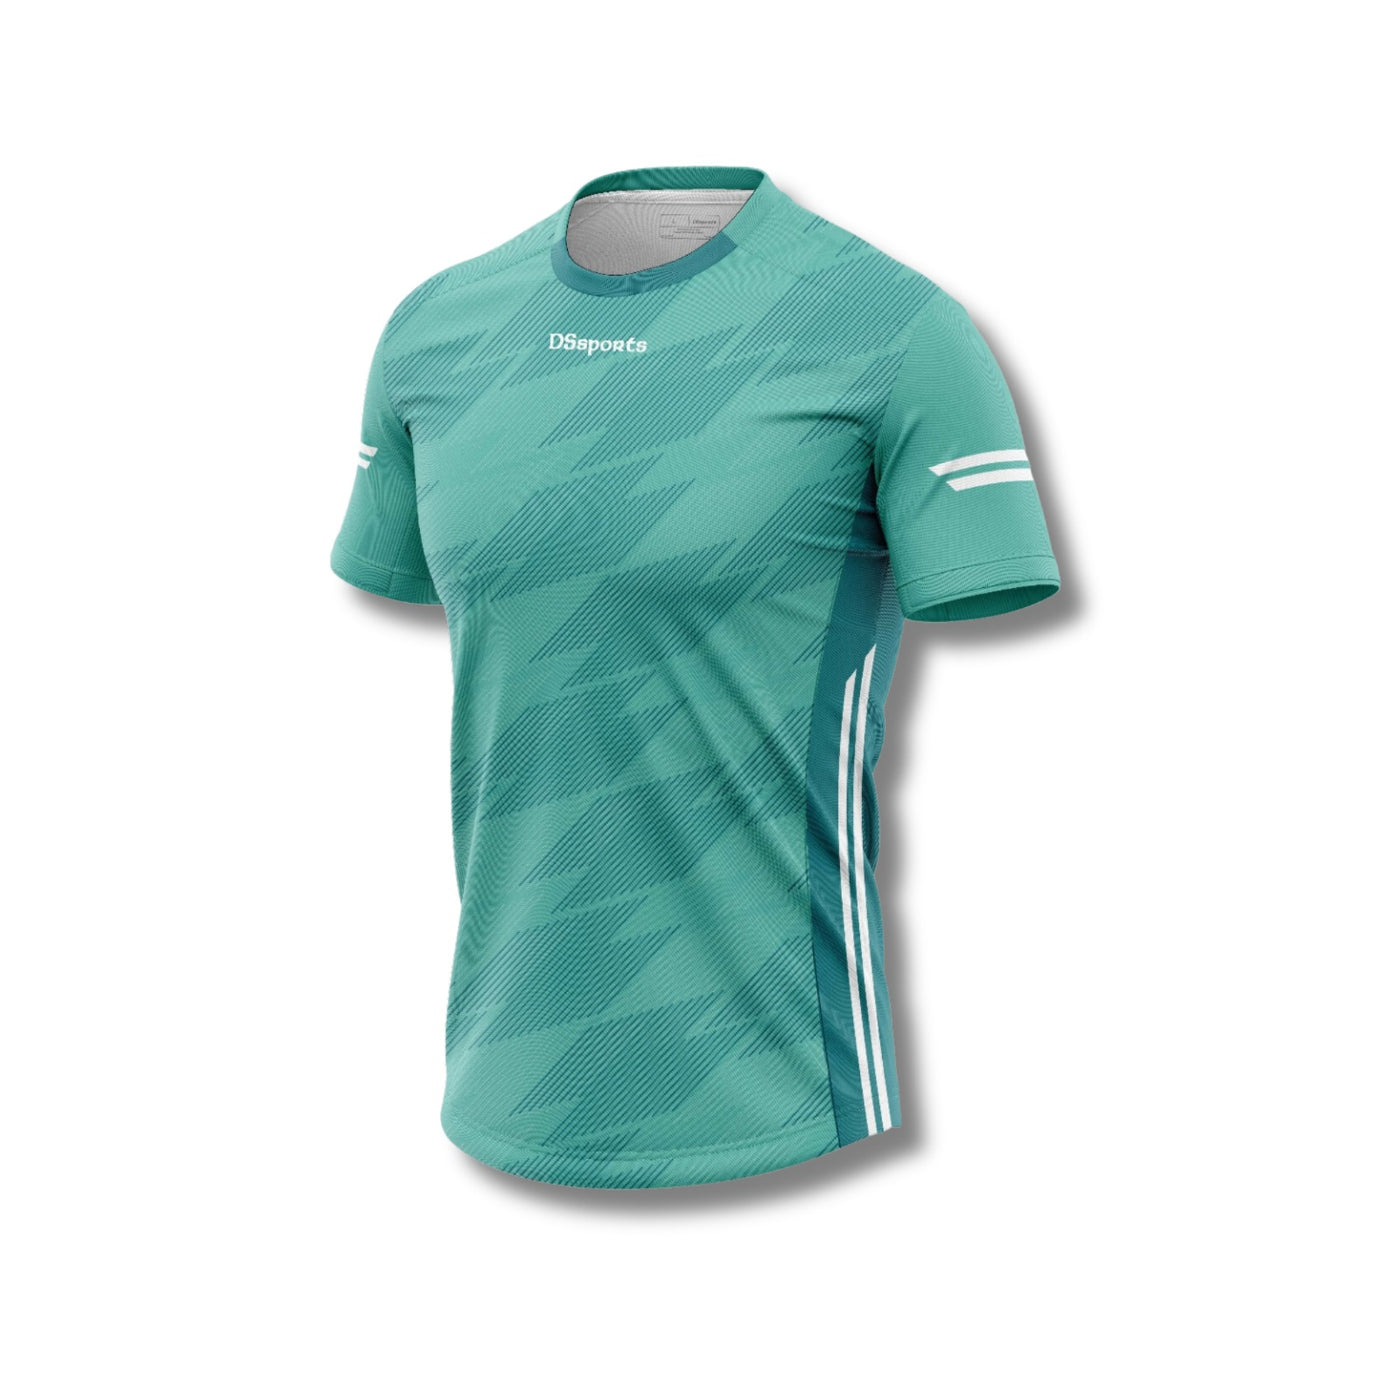 Teal Training Jersey